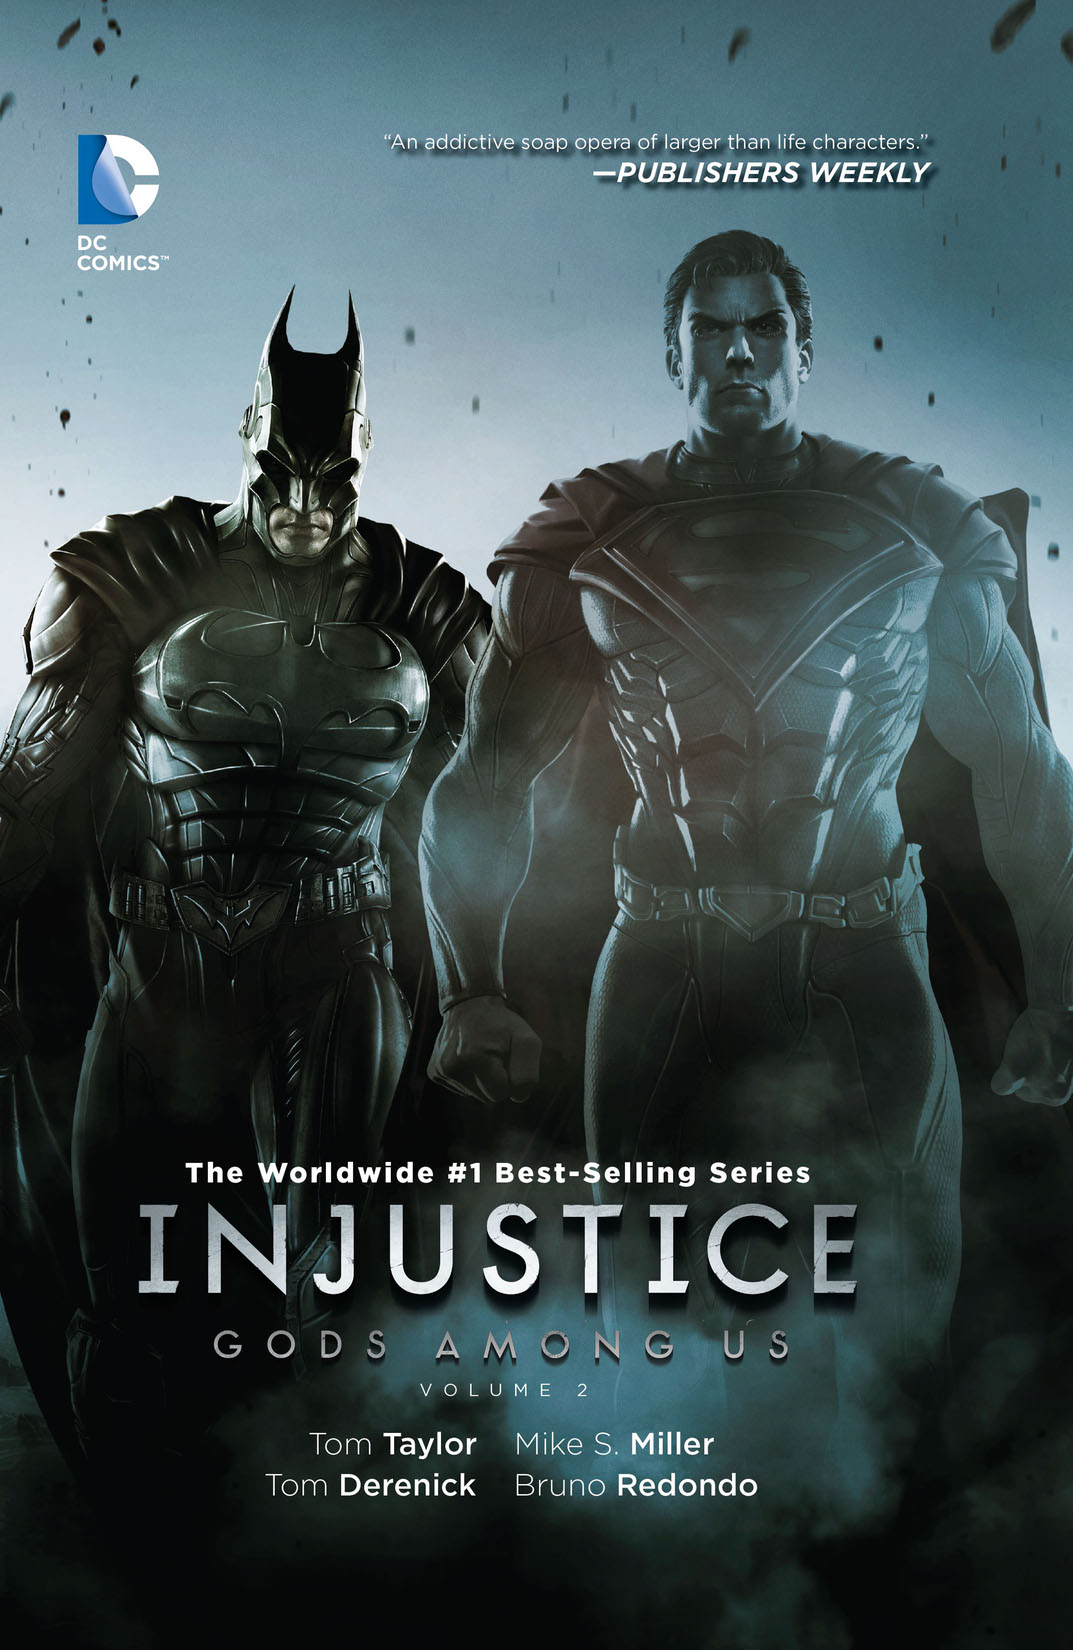 Injustice: Gods Among Us Vol. 2 preview images